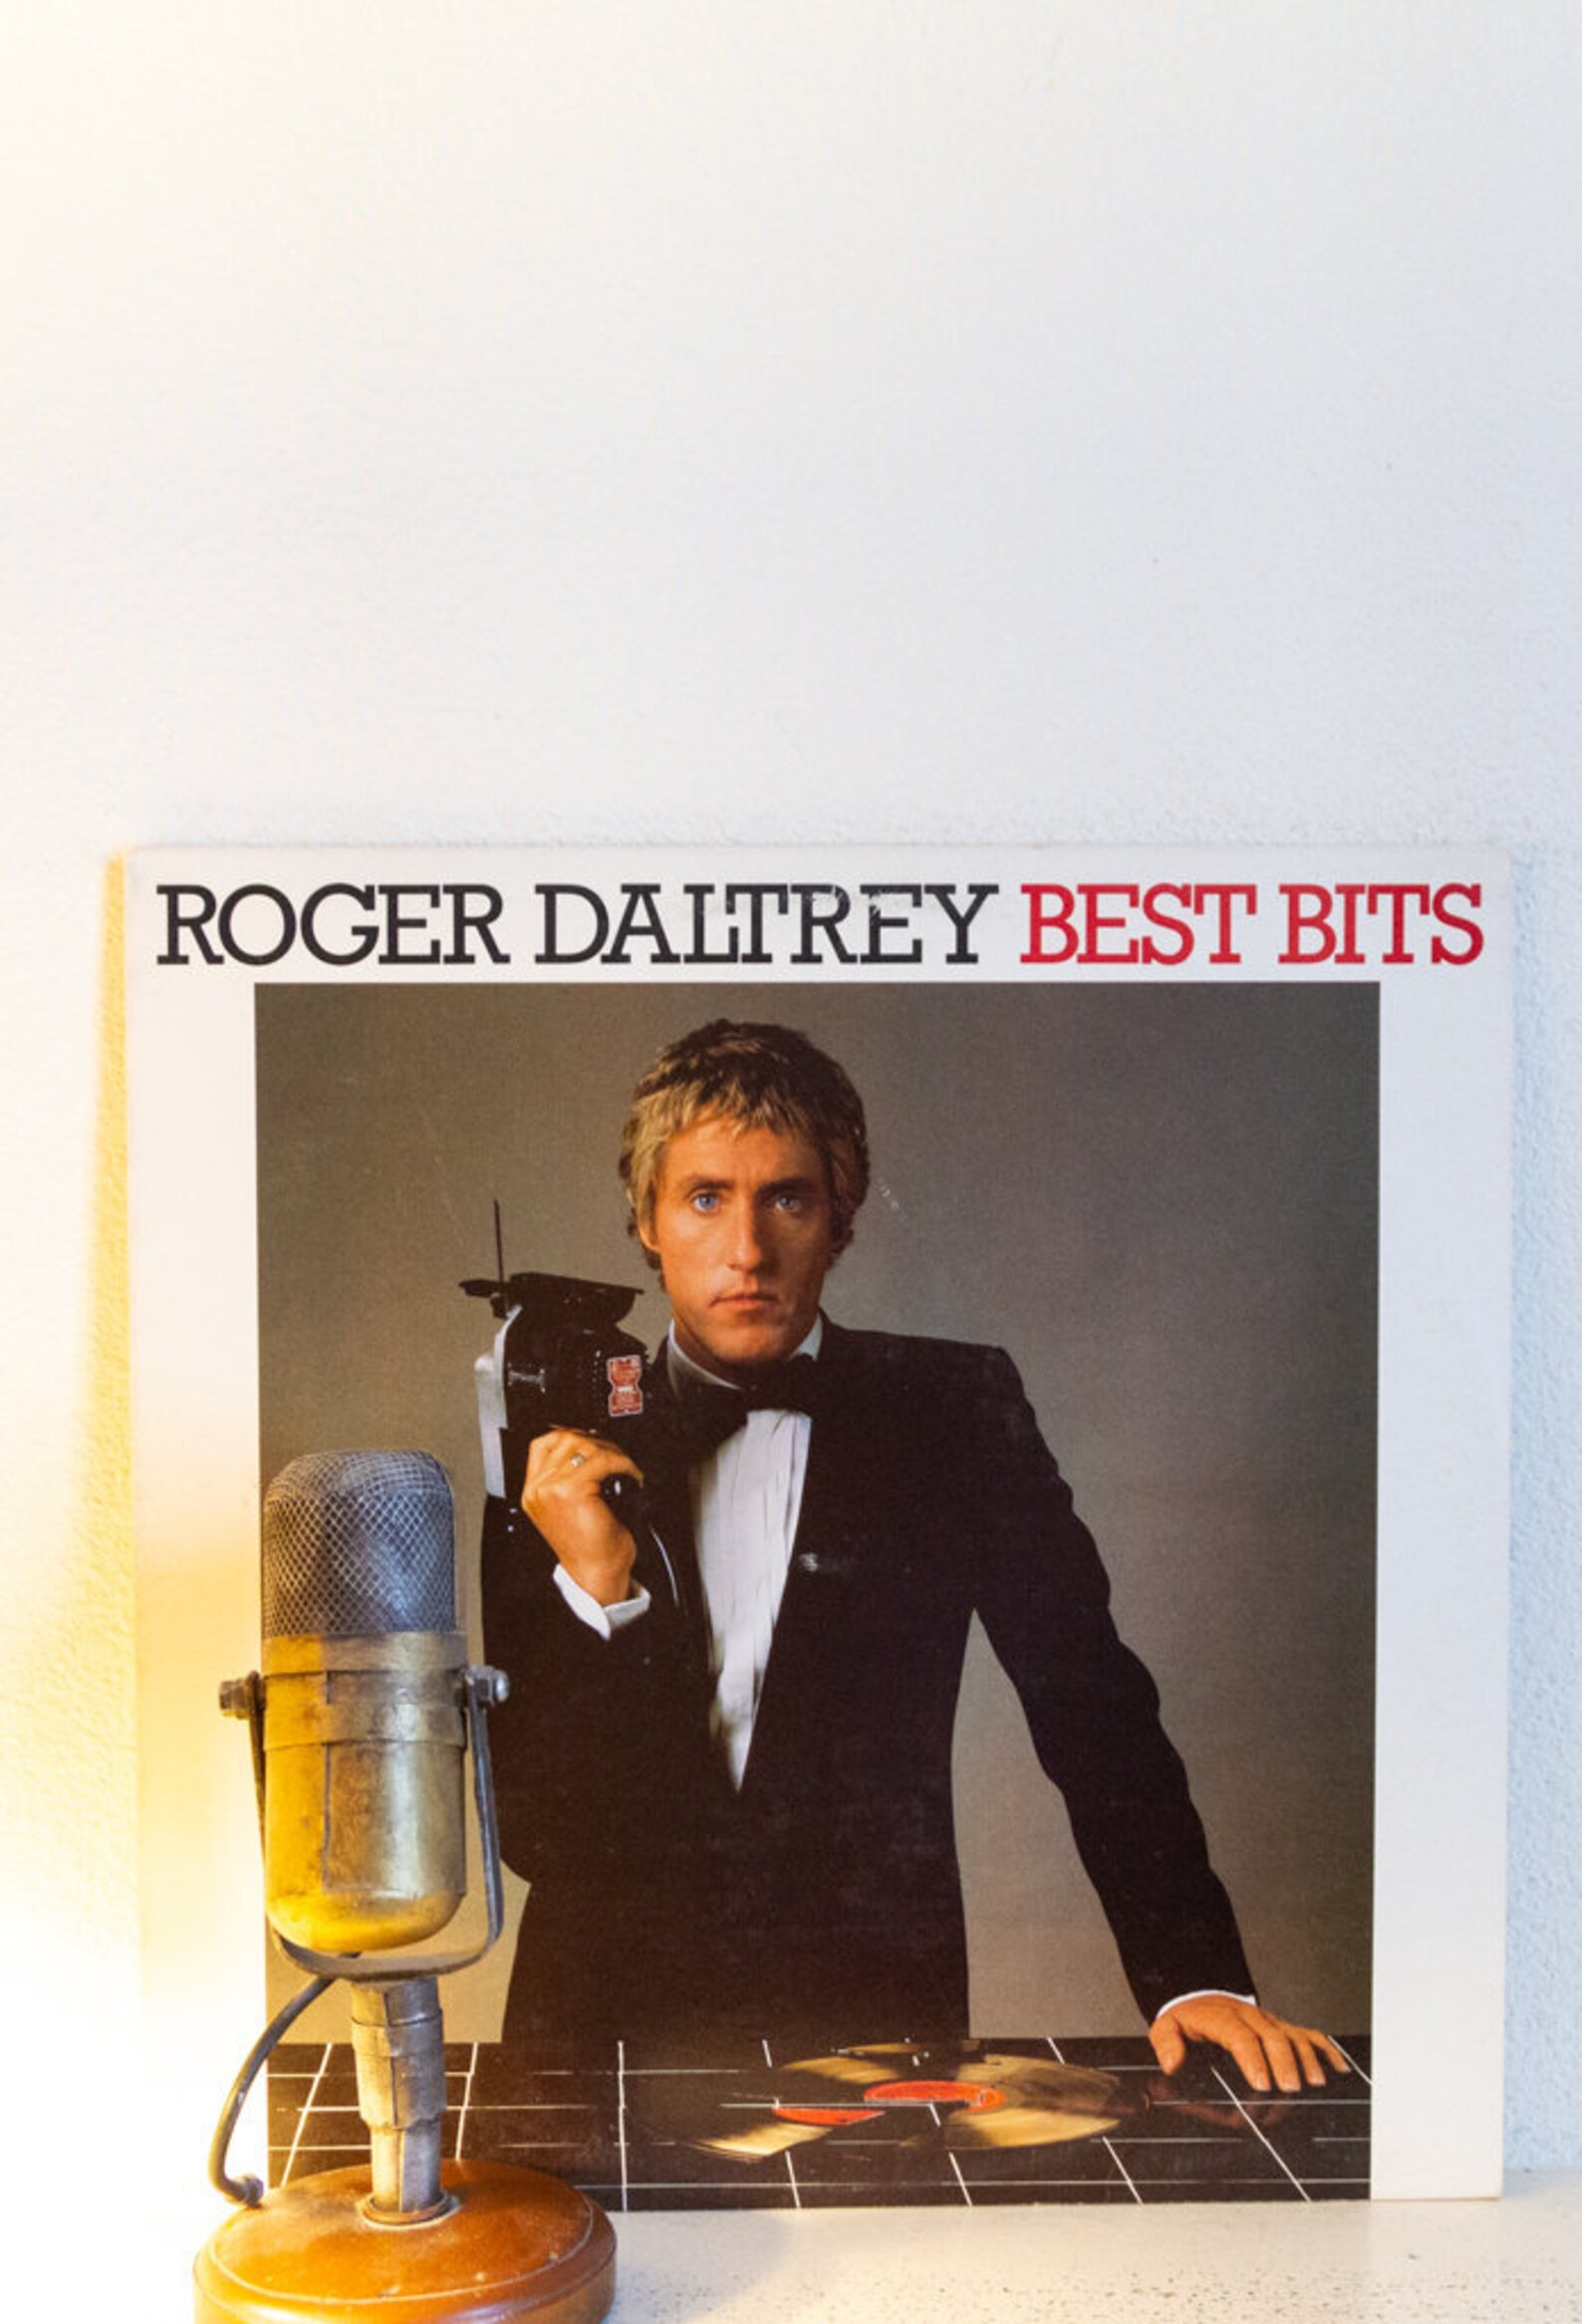 Roger Daltrey The Who Greatest Solo Songs Best Etsy